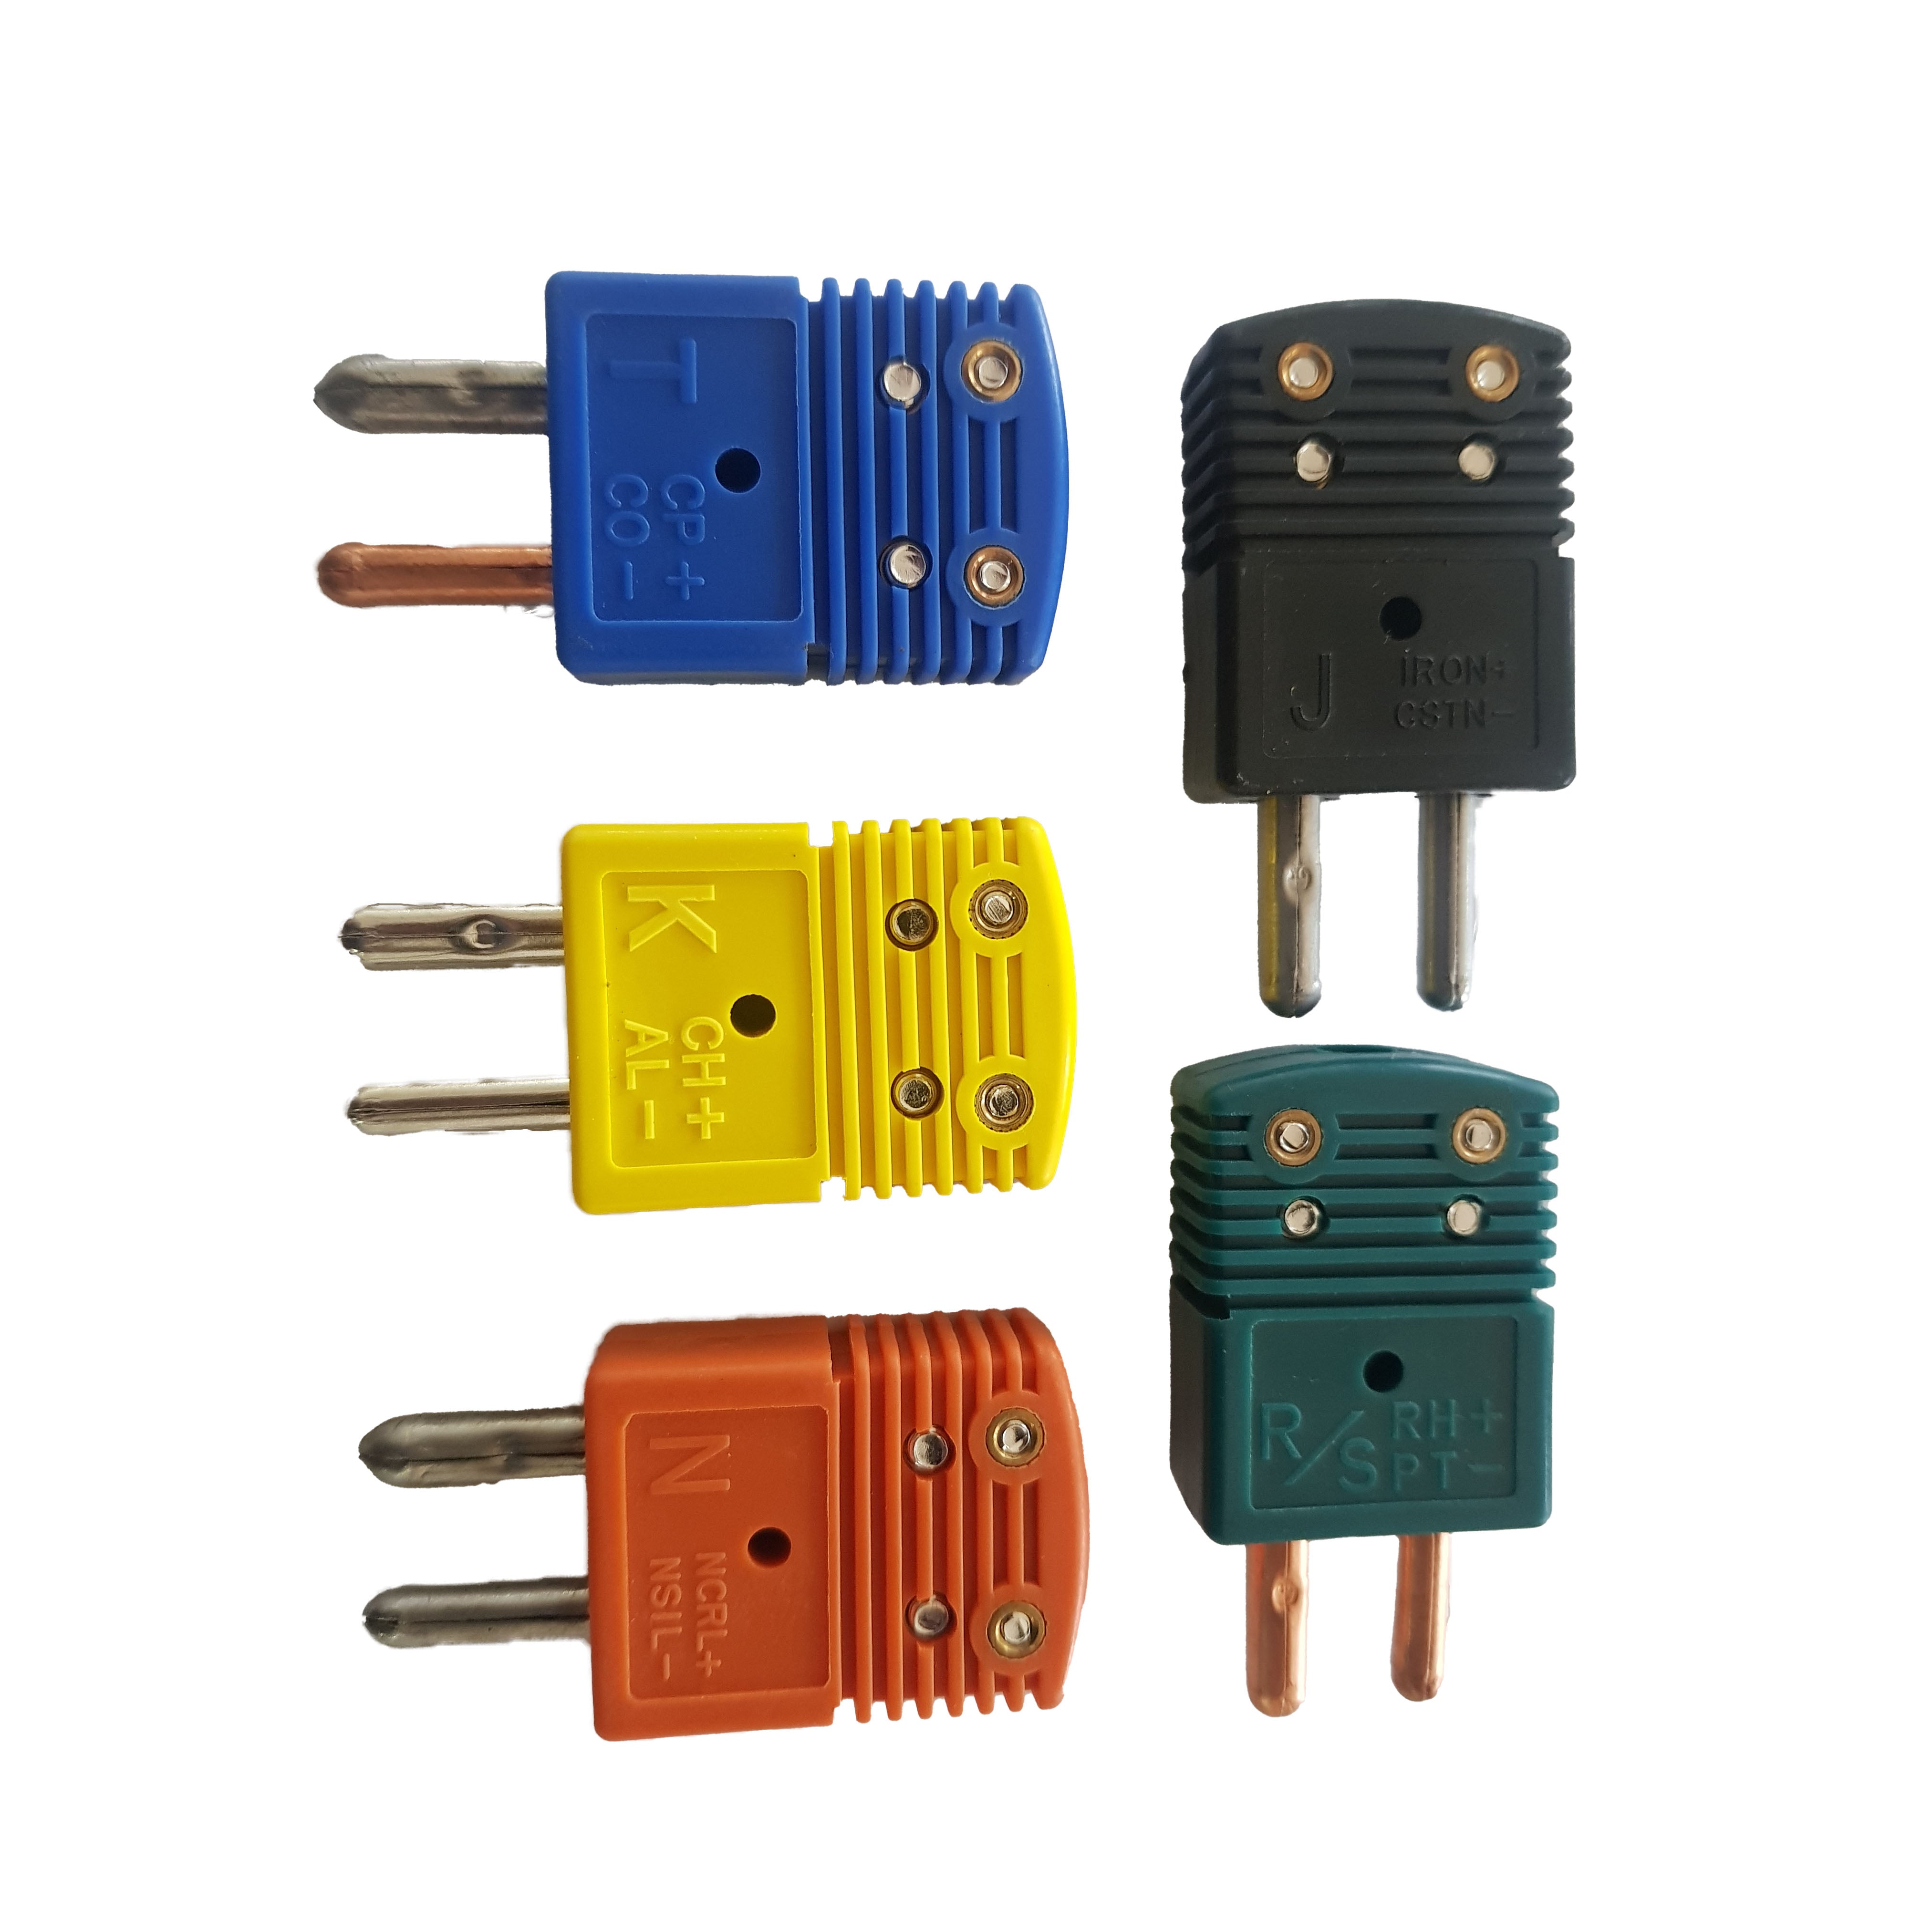 Thermocouple Standard Round Pin Connector Plug